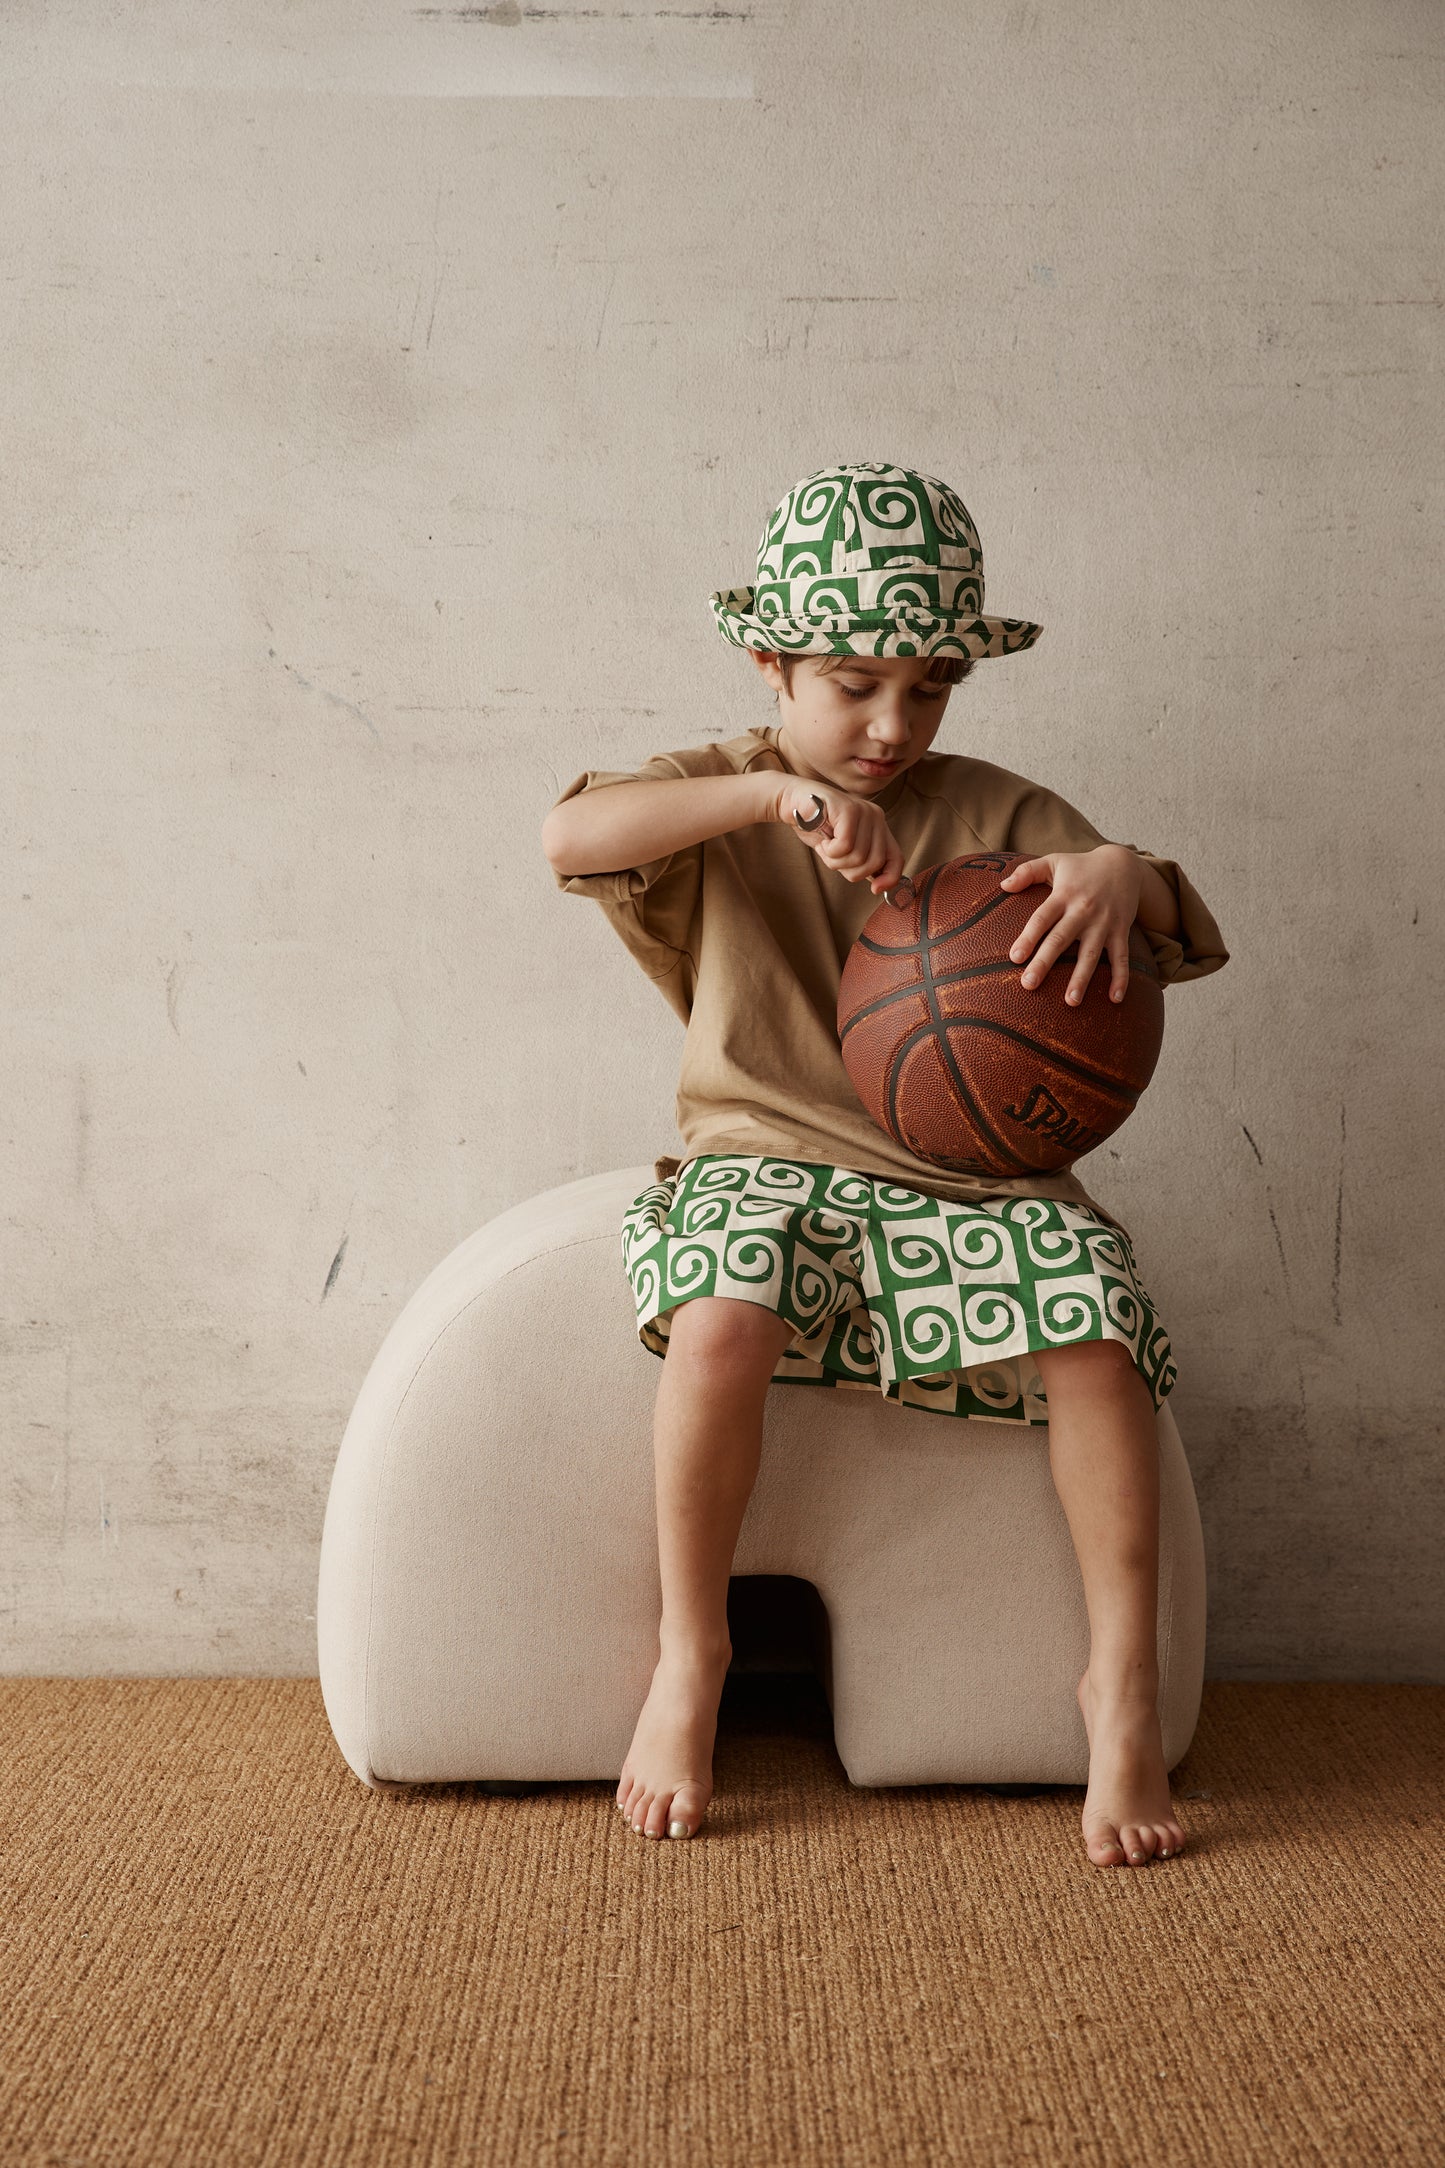 Green and Cream Patterned Cotton Kids Shorts